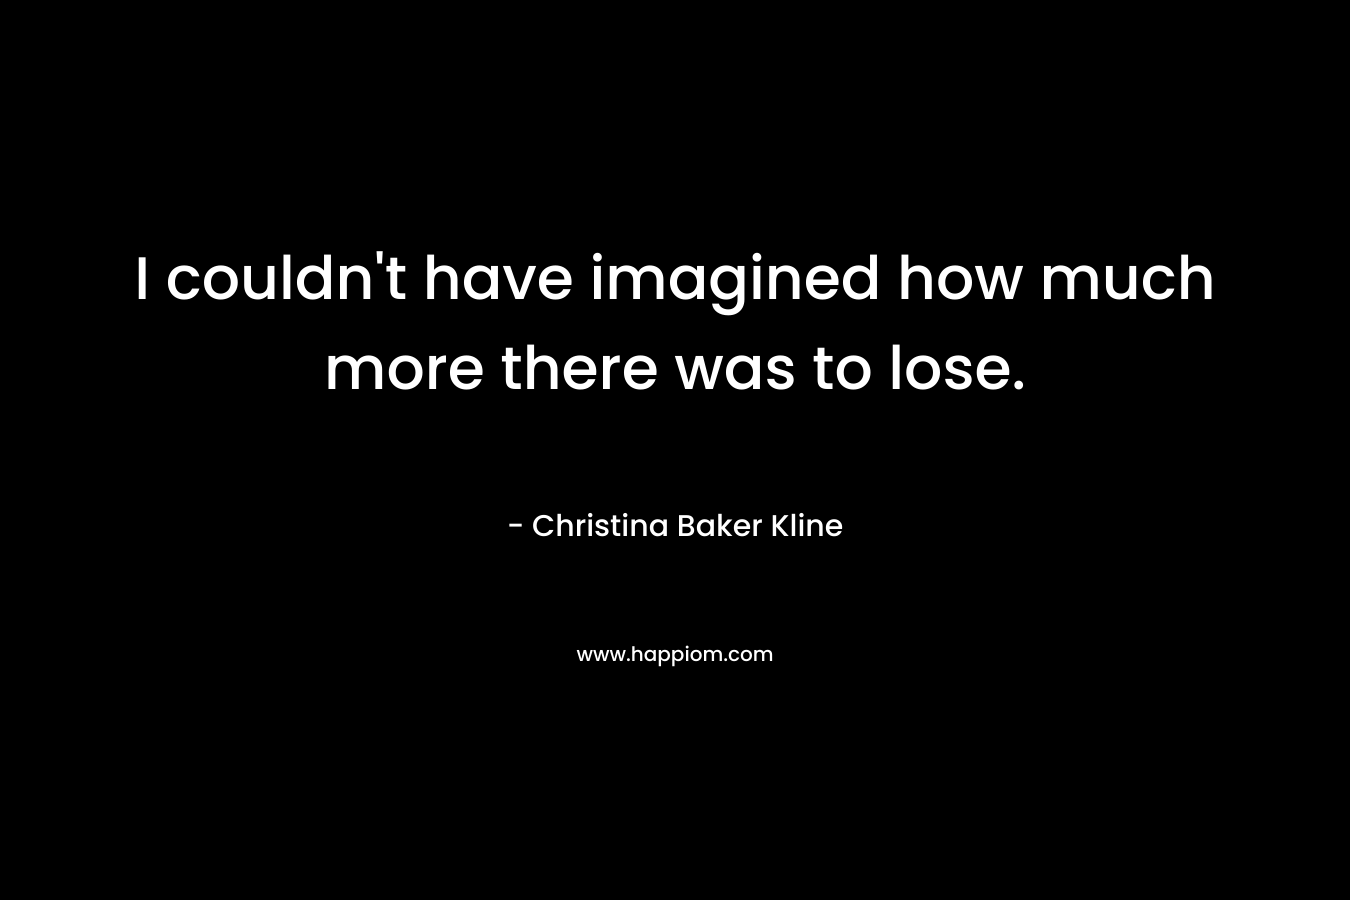 I couldn’t have imagined how much more there was to lose. – Christina Baker Kline